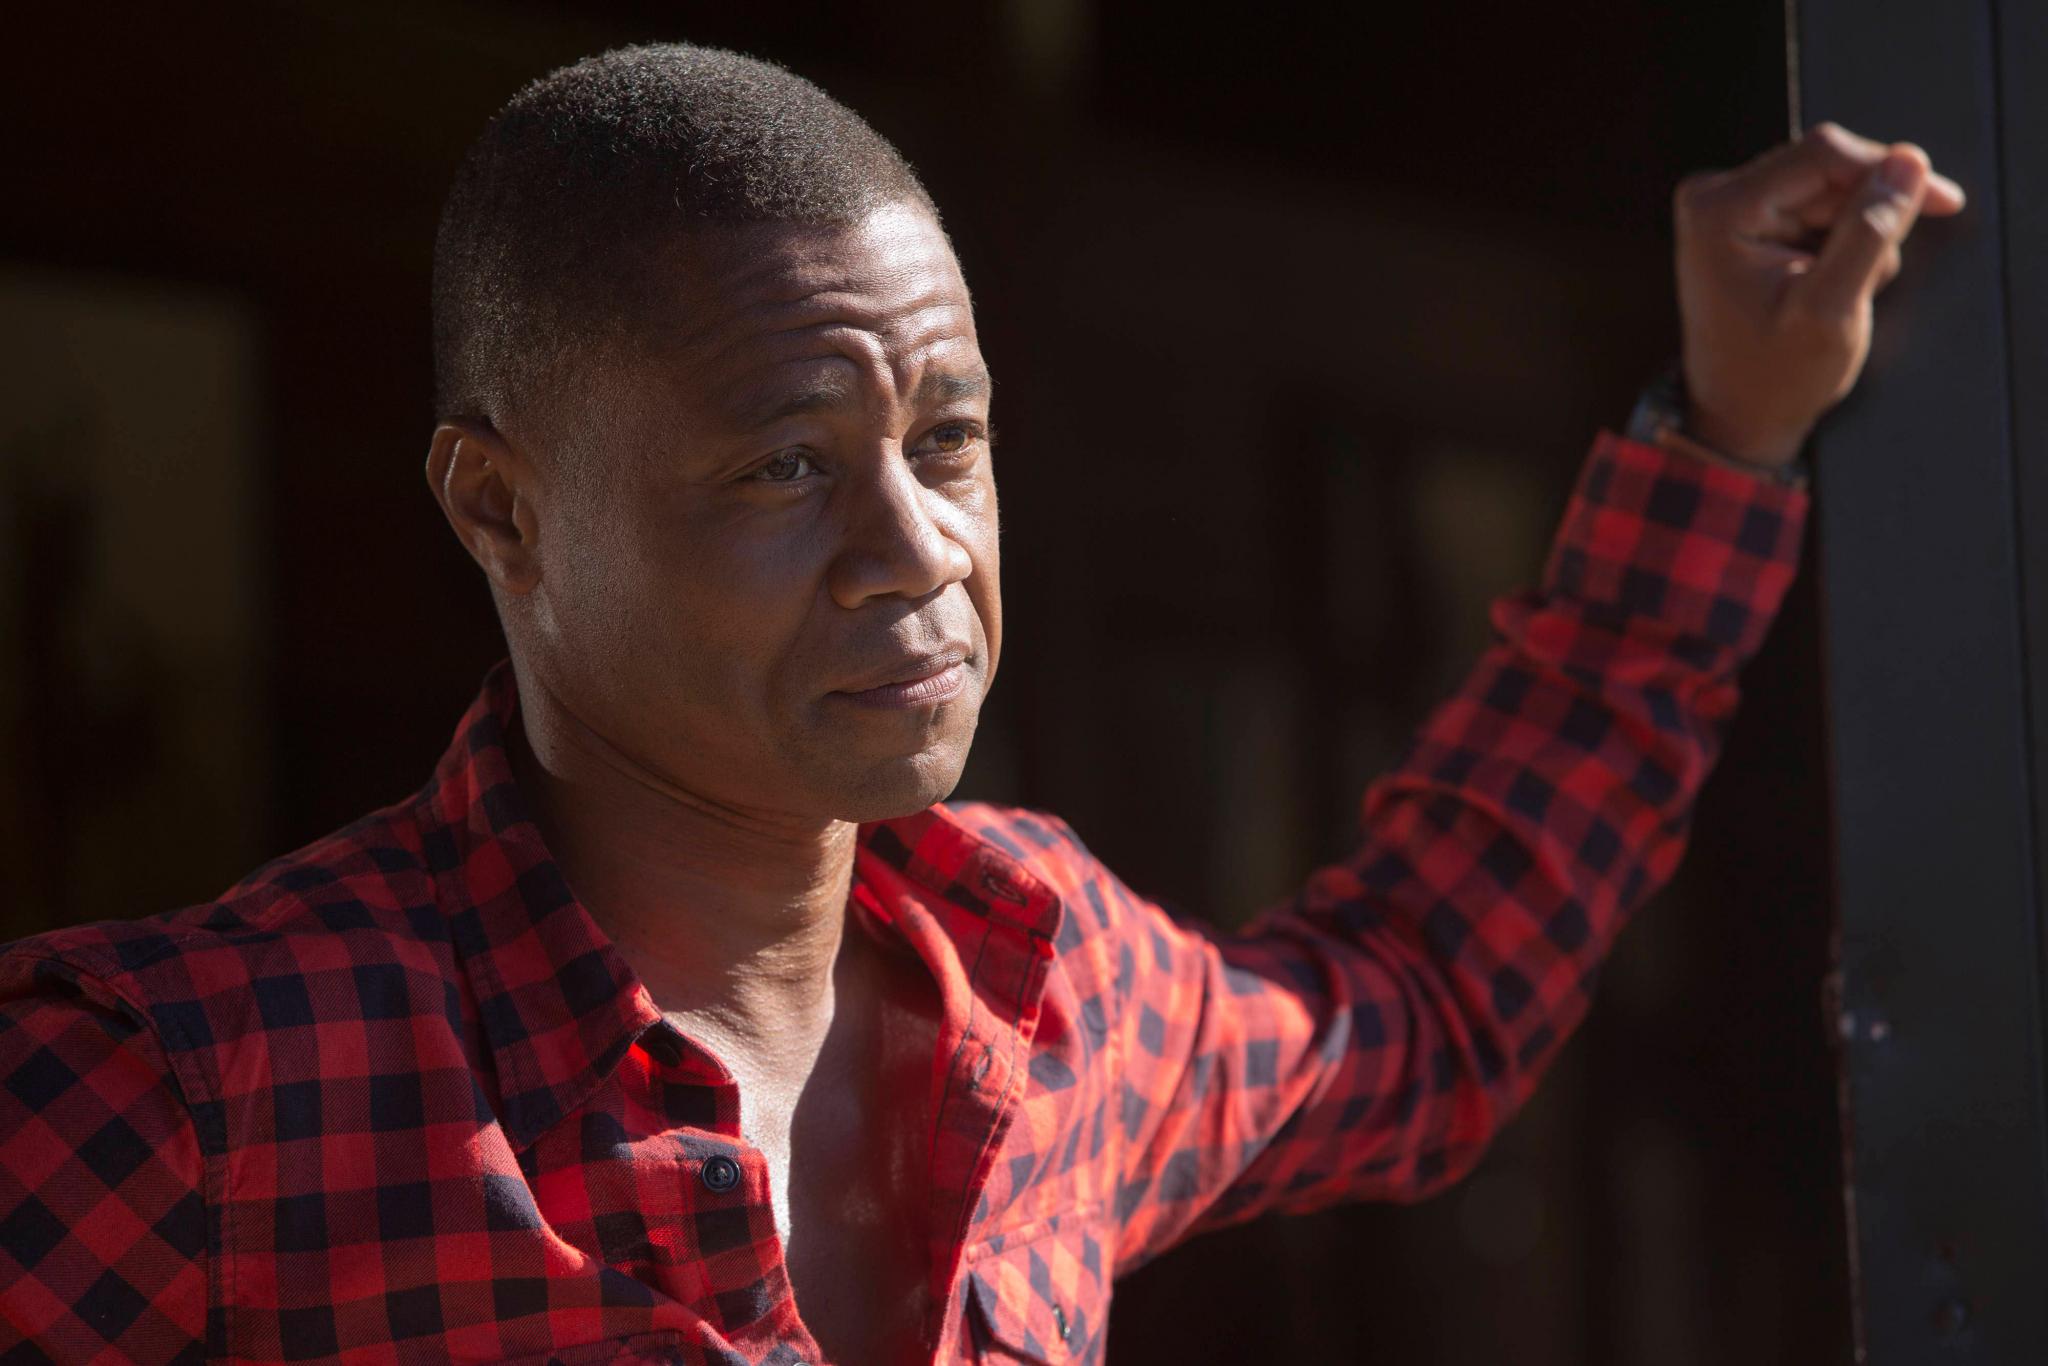 Cuba Gooding, Jr., Turns Himself In After Three Women Accuse Him Of Sexual Misconduct